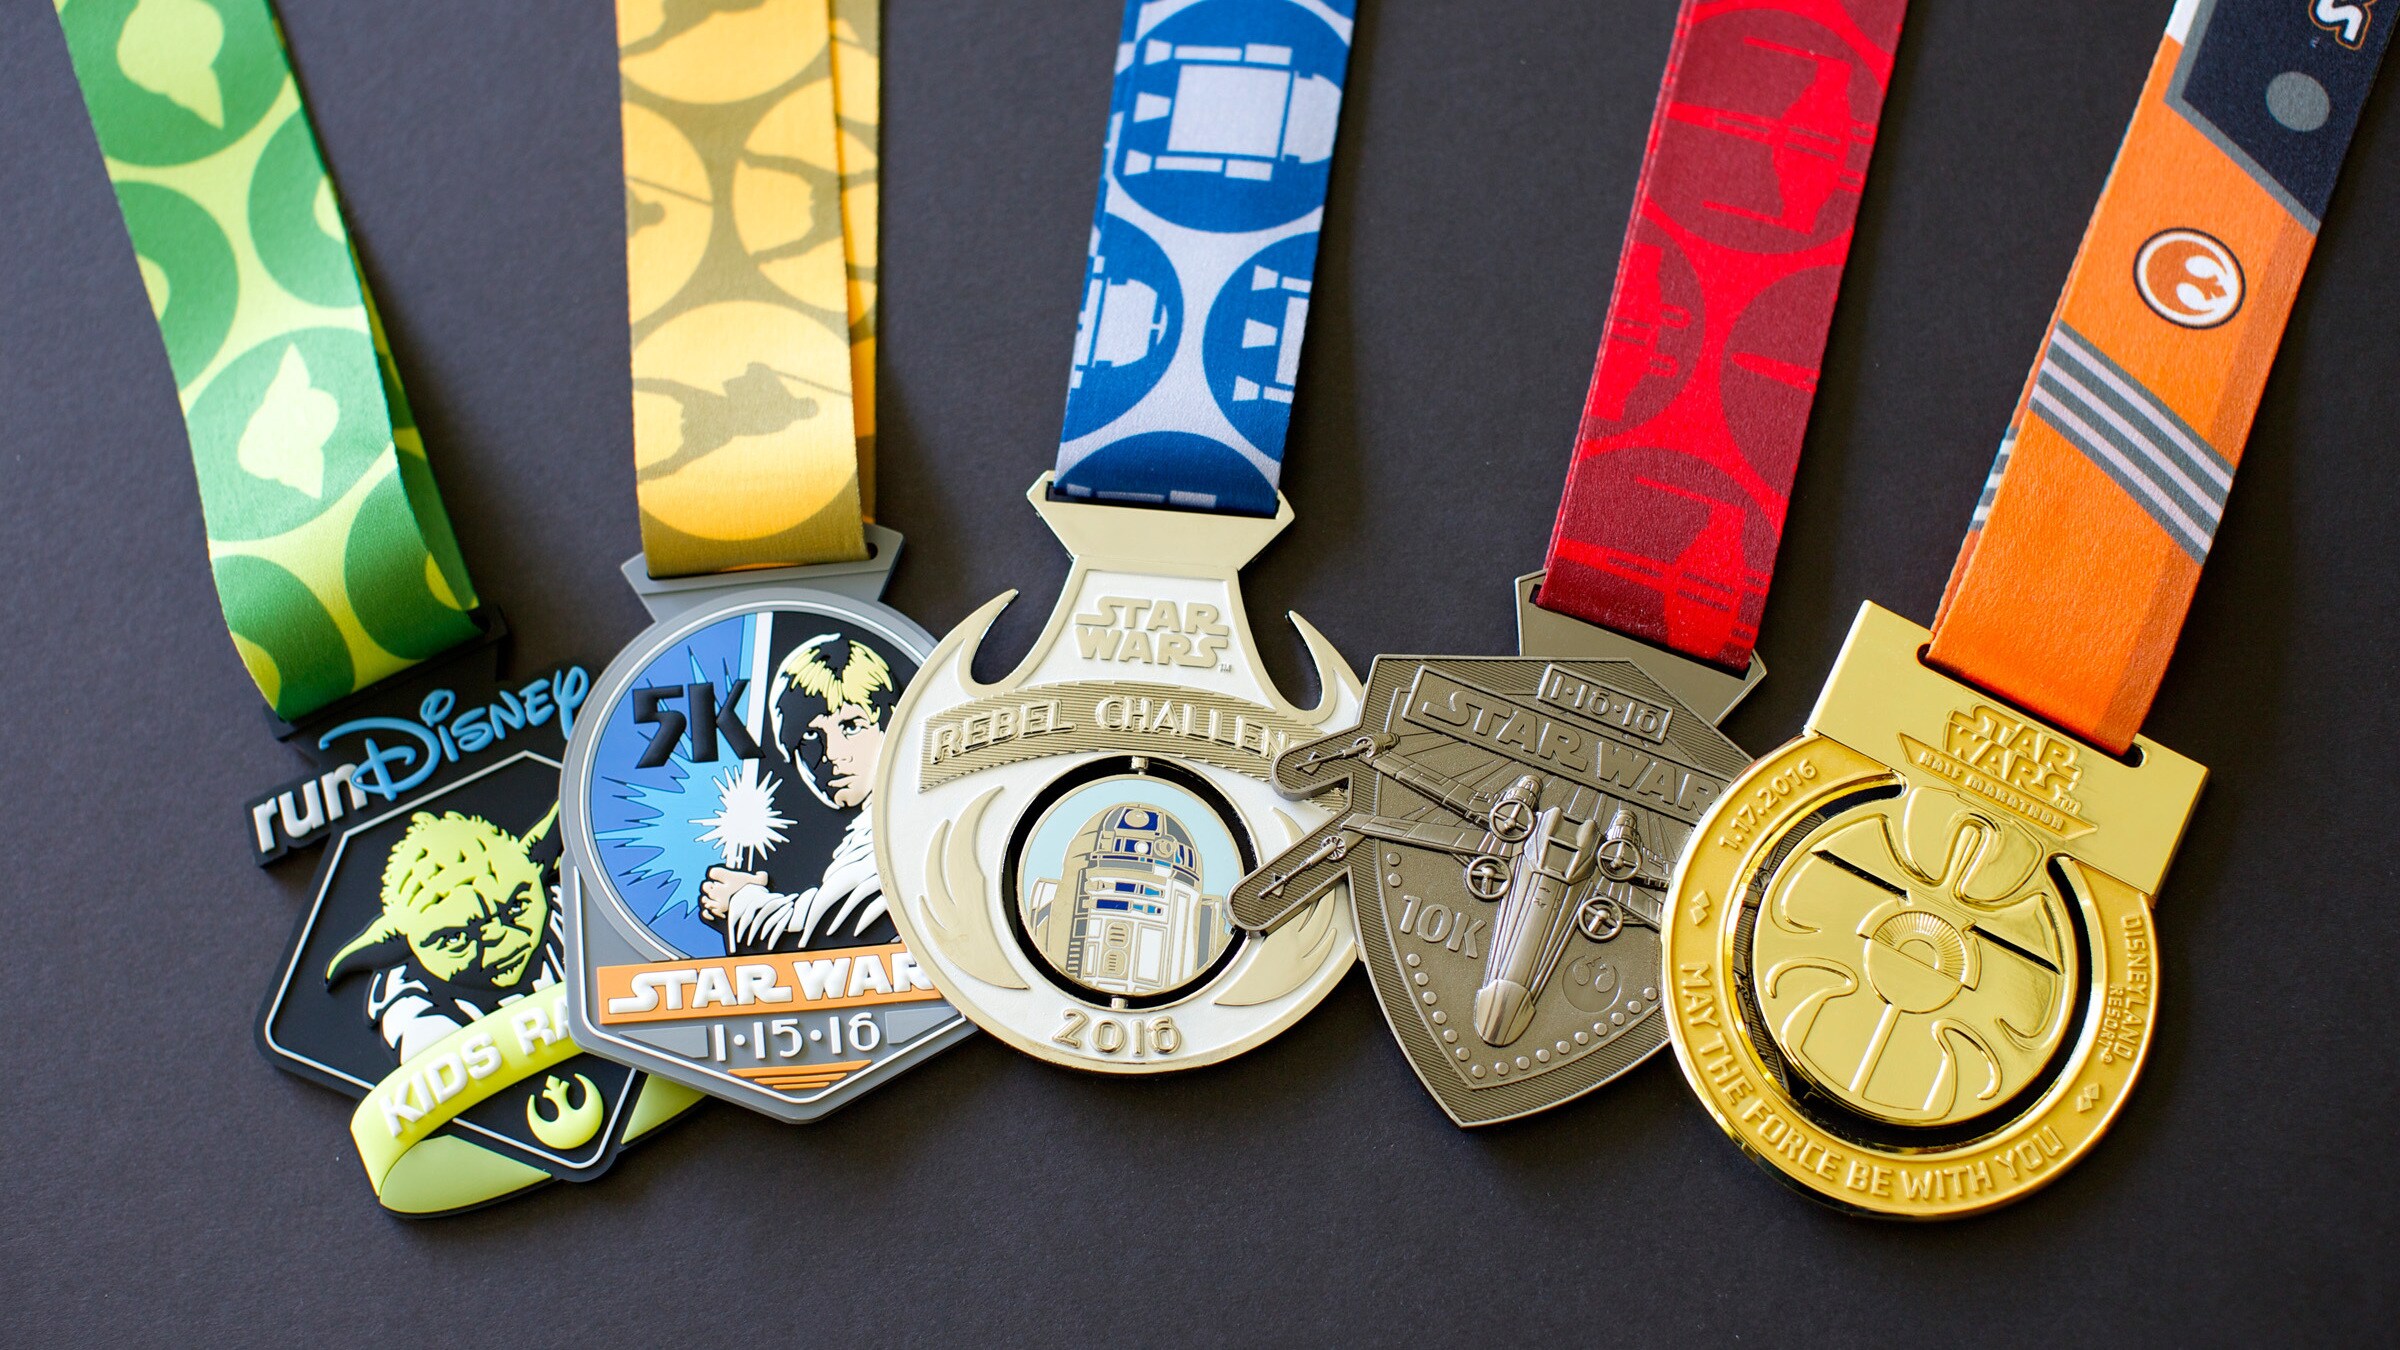 Get Ready for Your Personal Medal Ceremony: runDisney Star Wars Medal Preview!